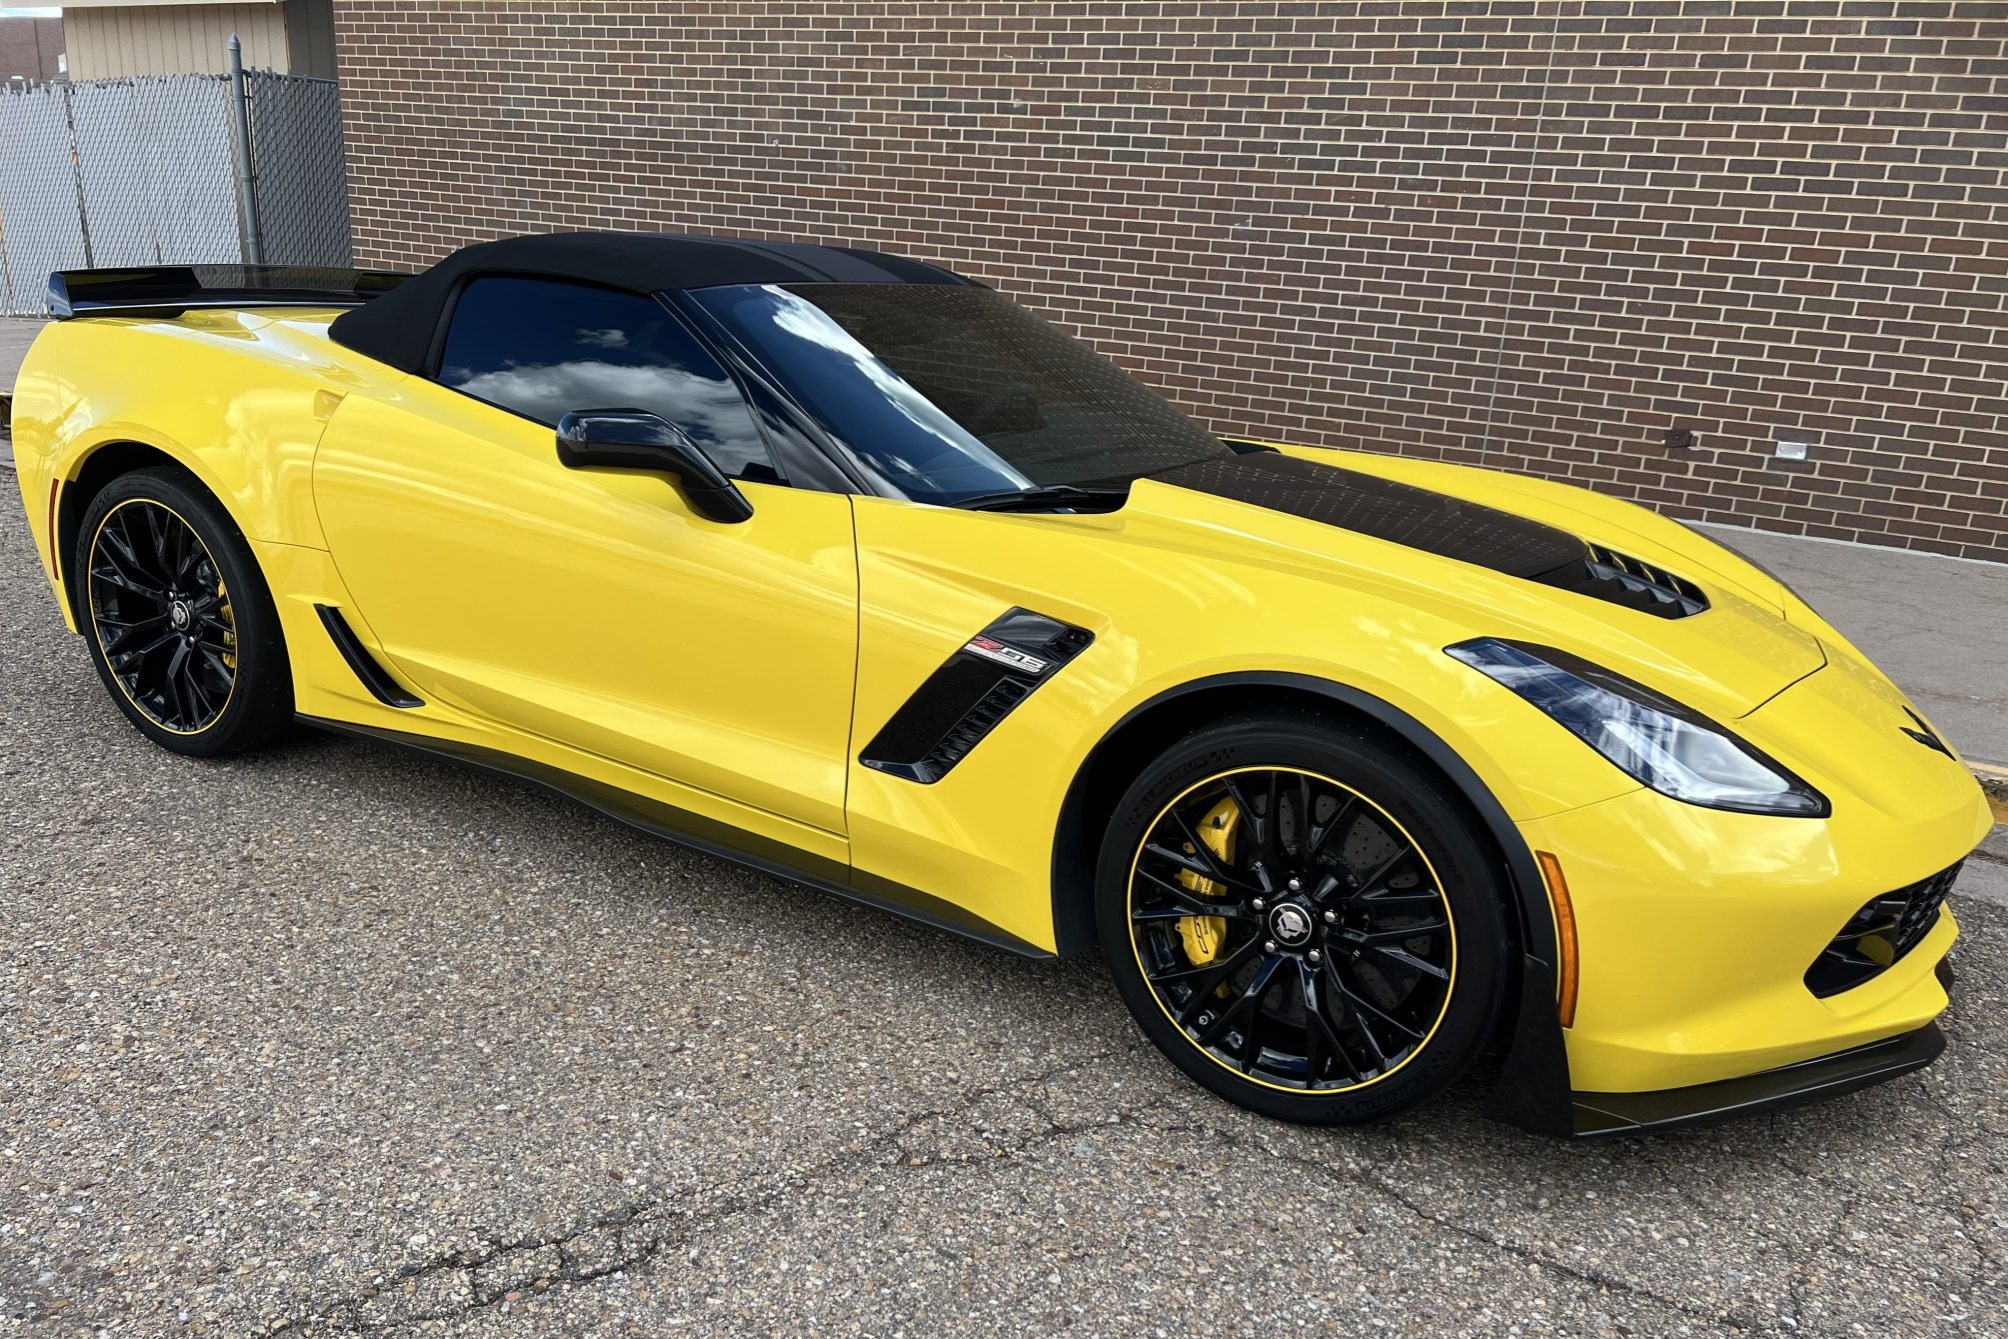 Used 1,800-Mile 2016 Chevrolet Corvette Z06 Convertible C7.R Edition 7-Speed Review